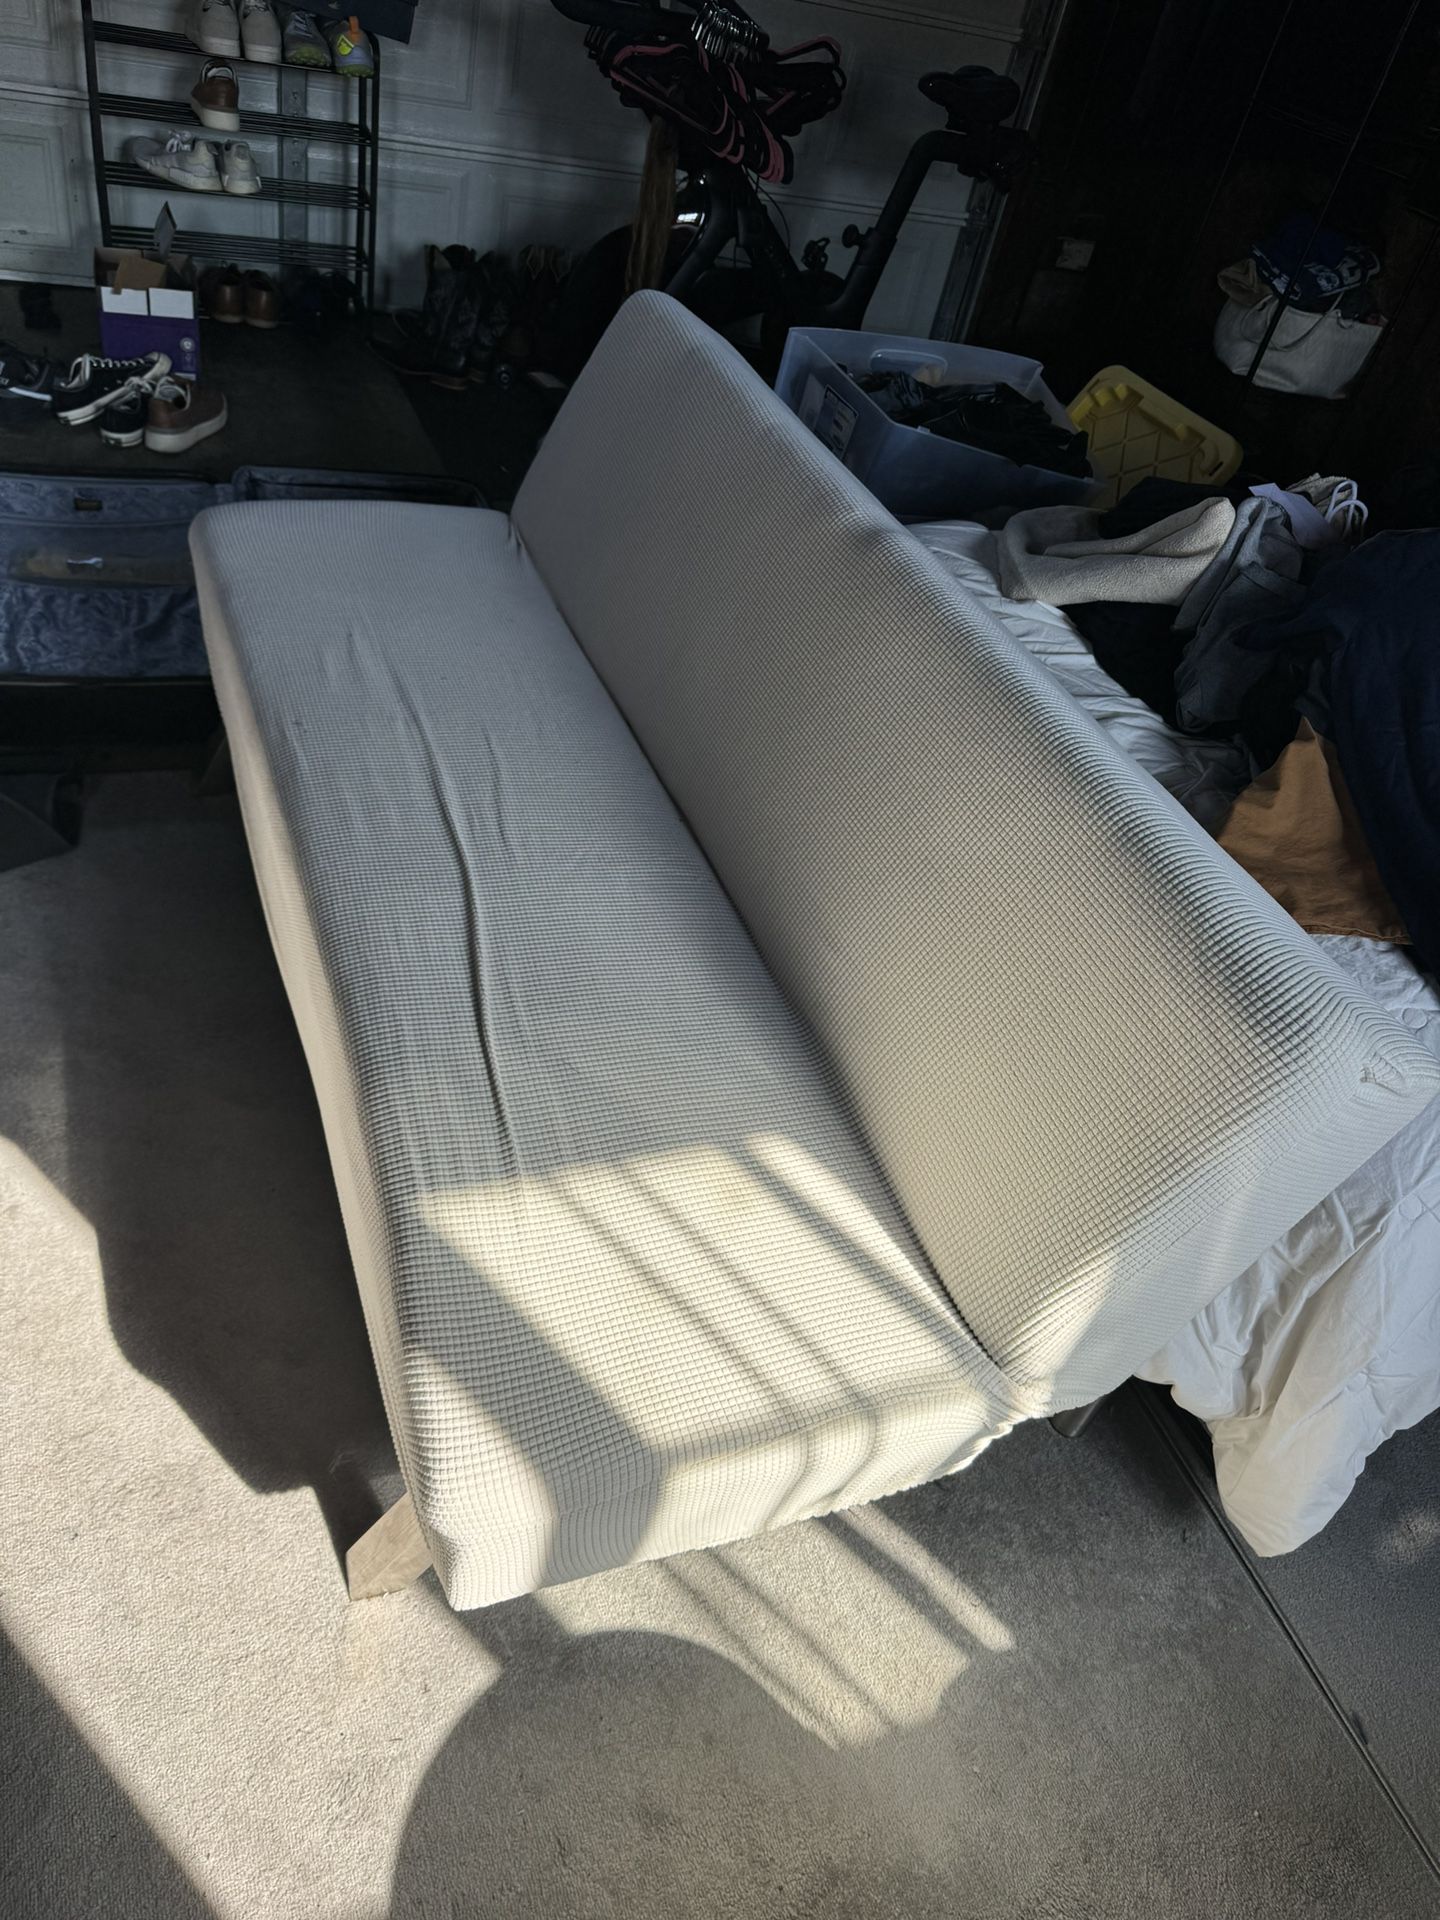 Futon With Covers 